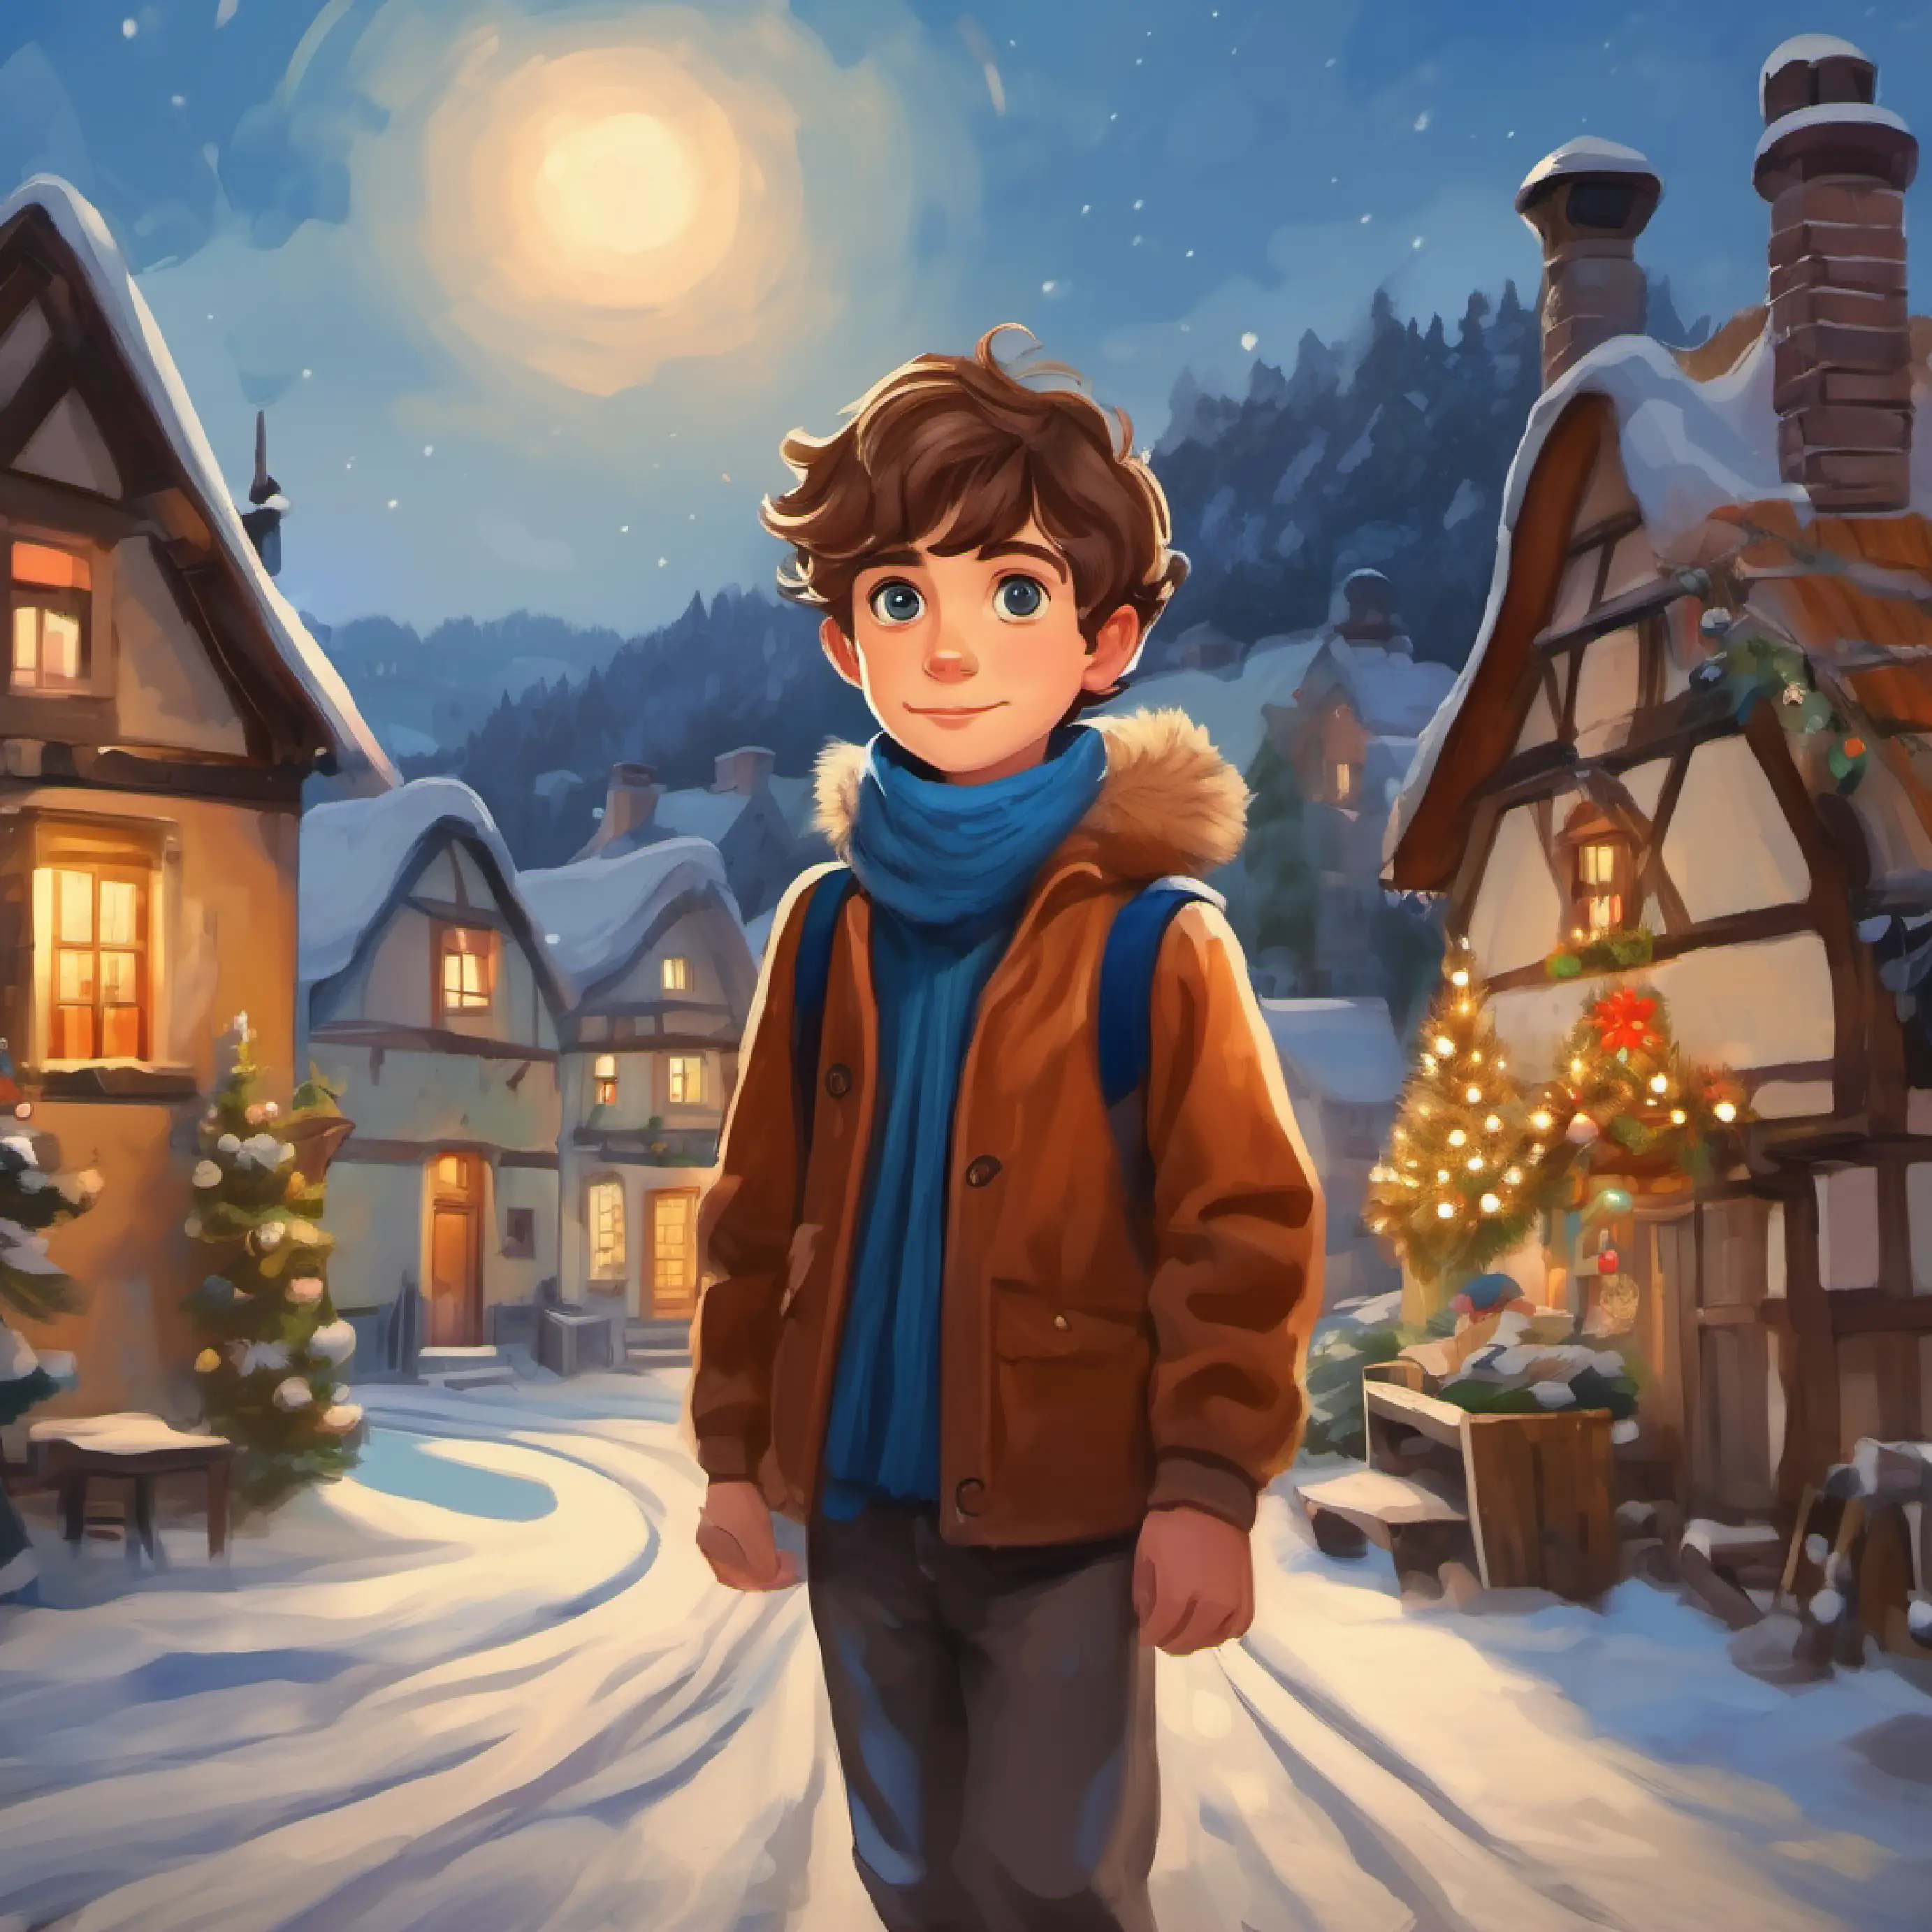 Introduction to A curious, adventurous boy with brown hair and blue eyes, a small village setting